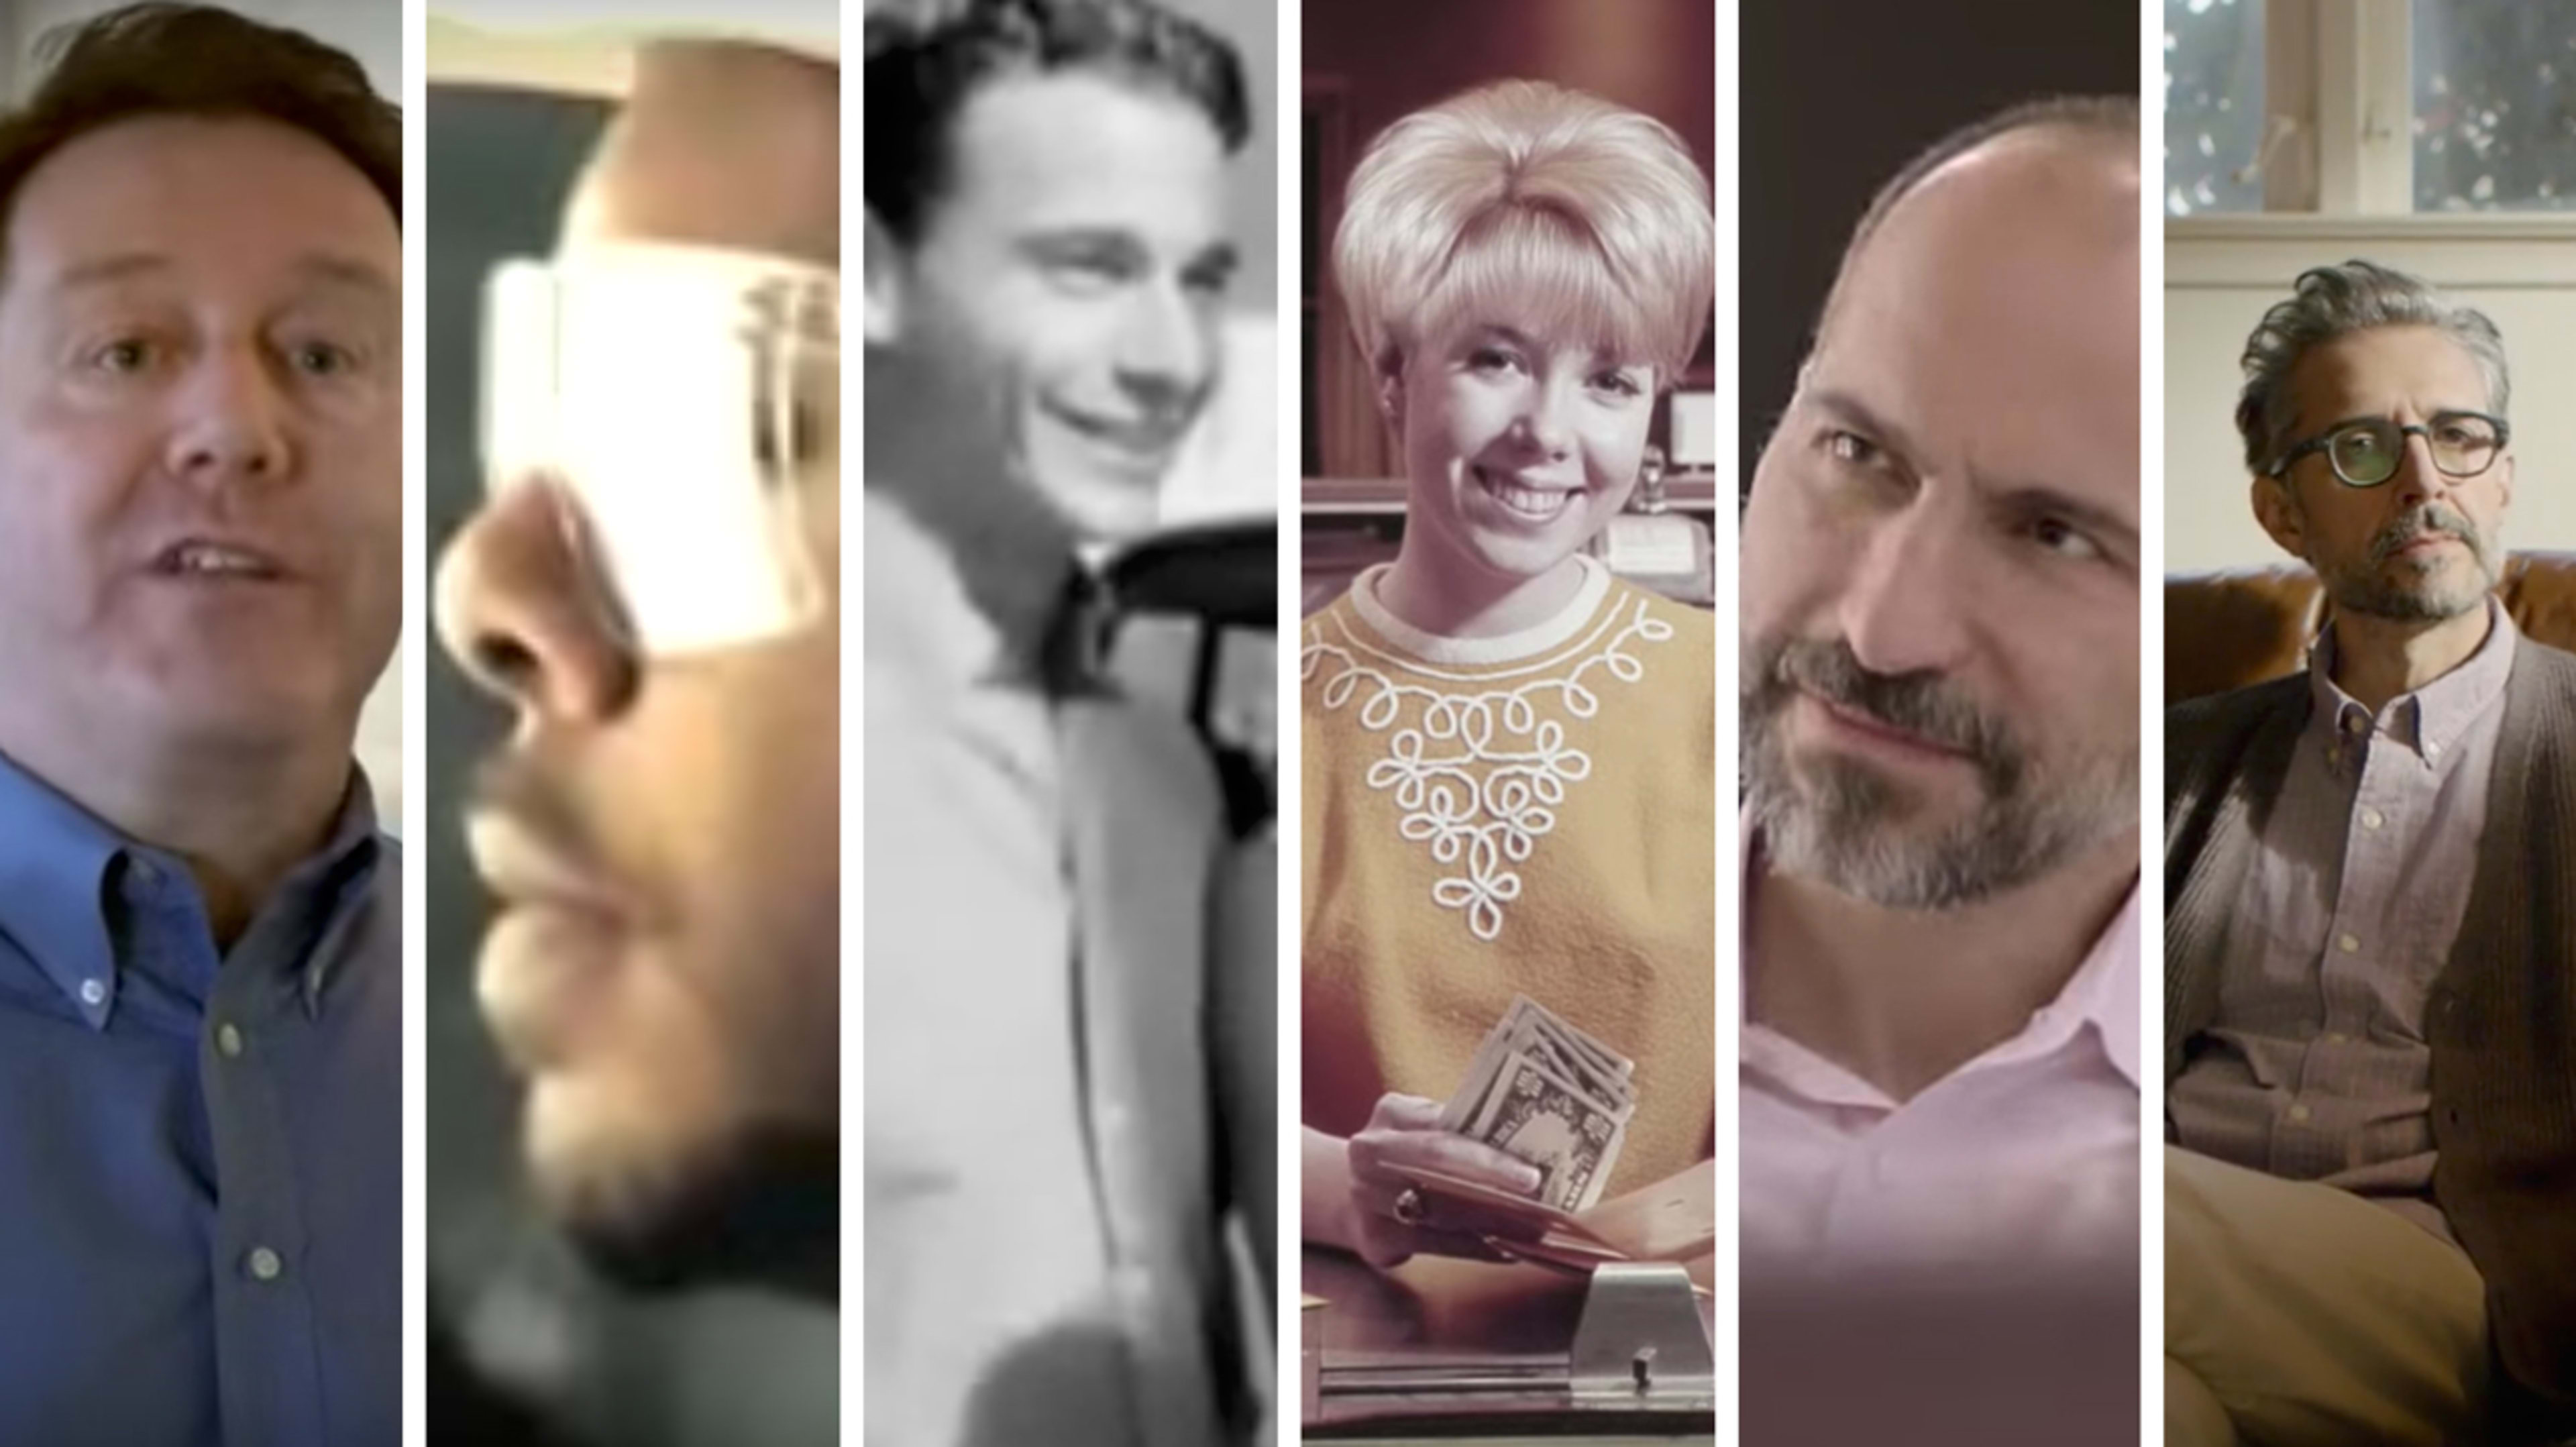 Facebook, Uber, Wells Fargo, and the new wave of Apology Ads